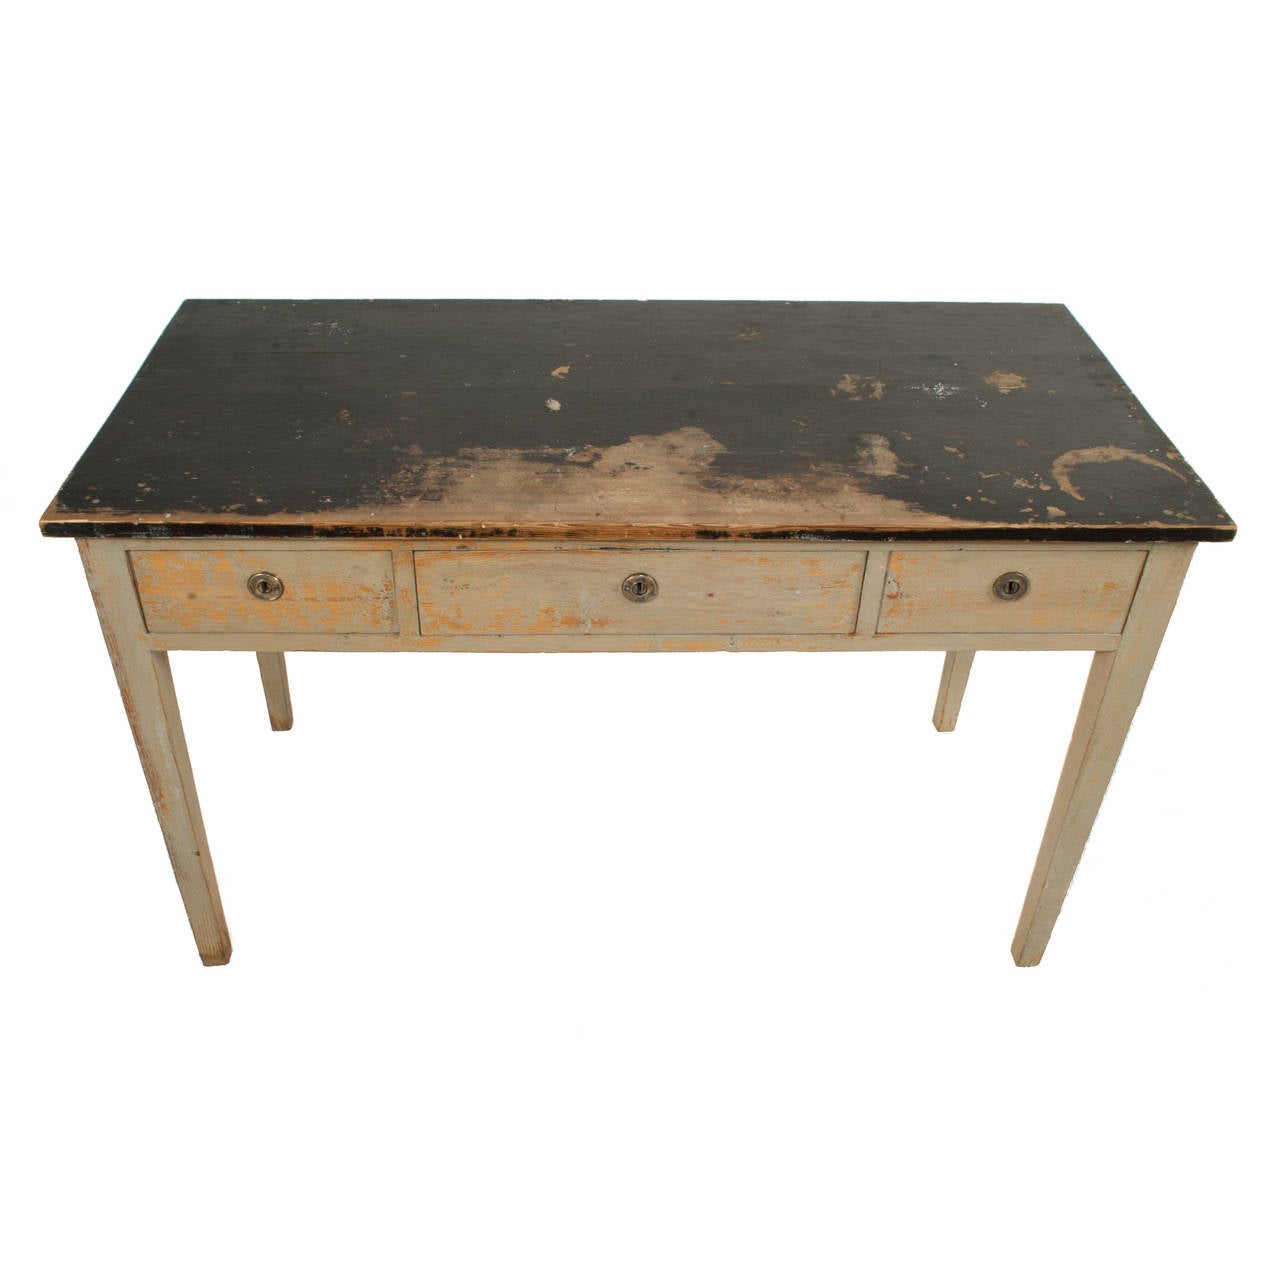 Gustavian console with three drawers in a worn black and cream colored patina.